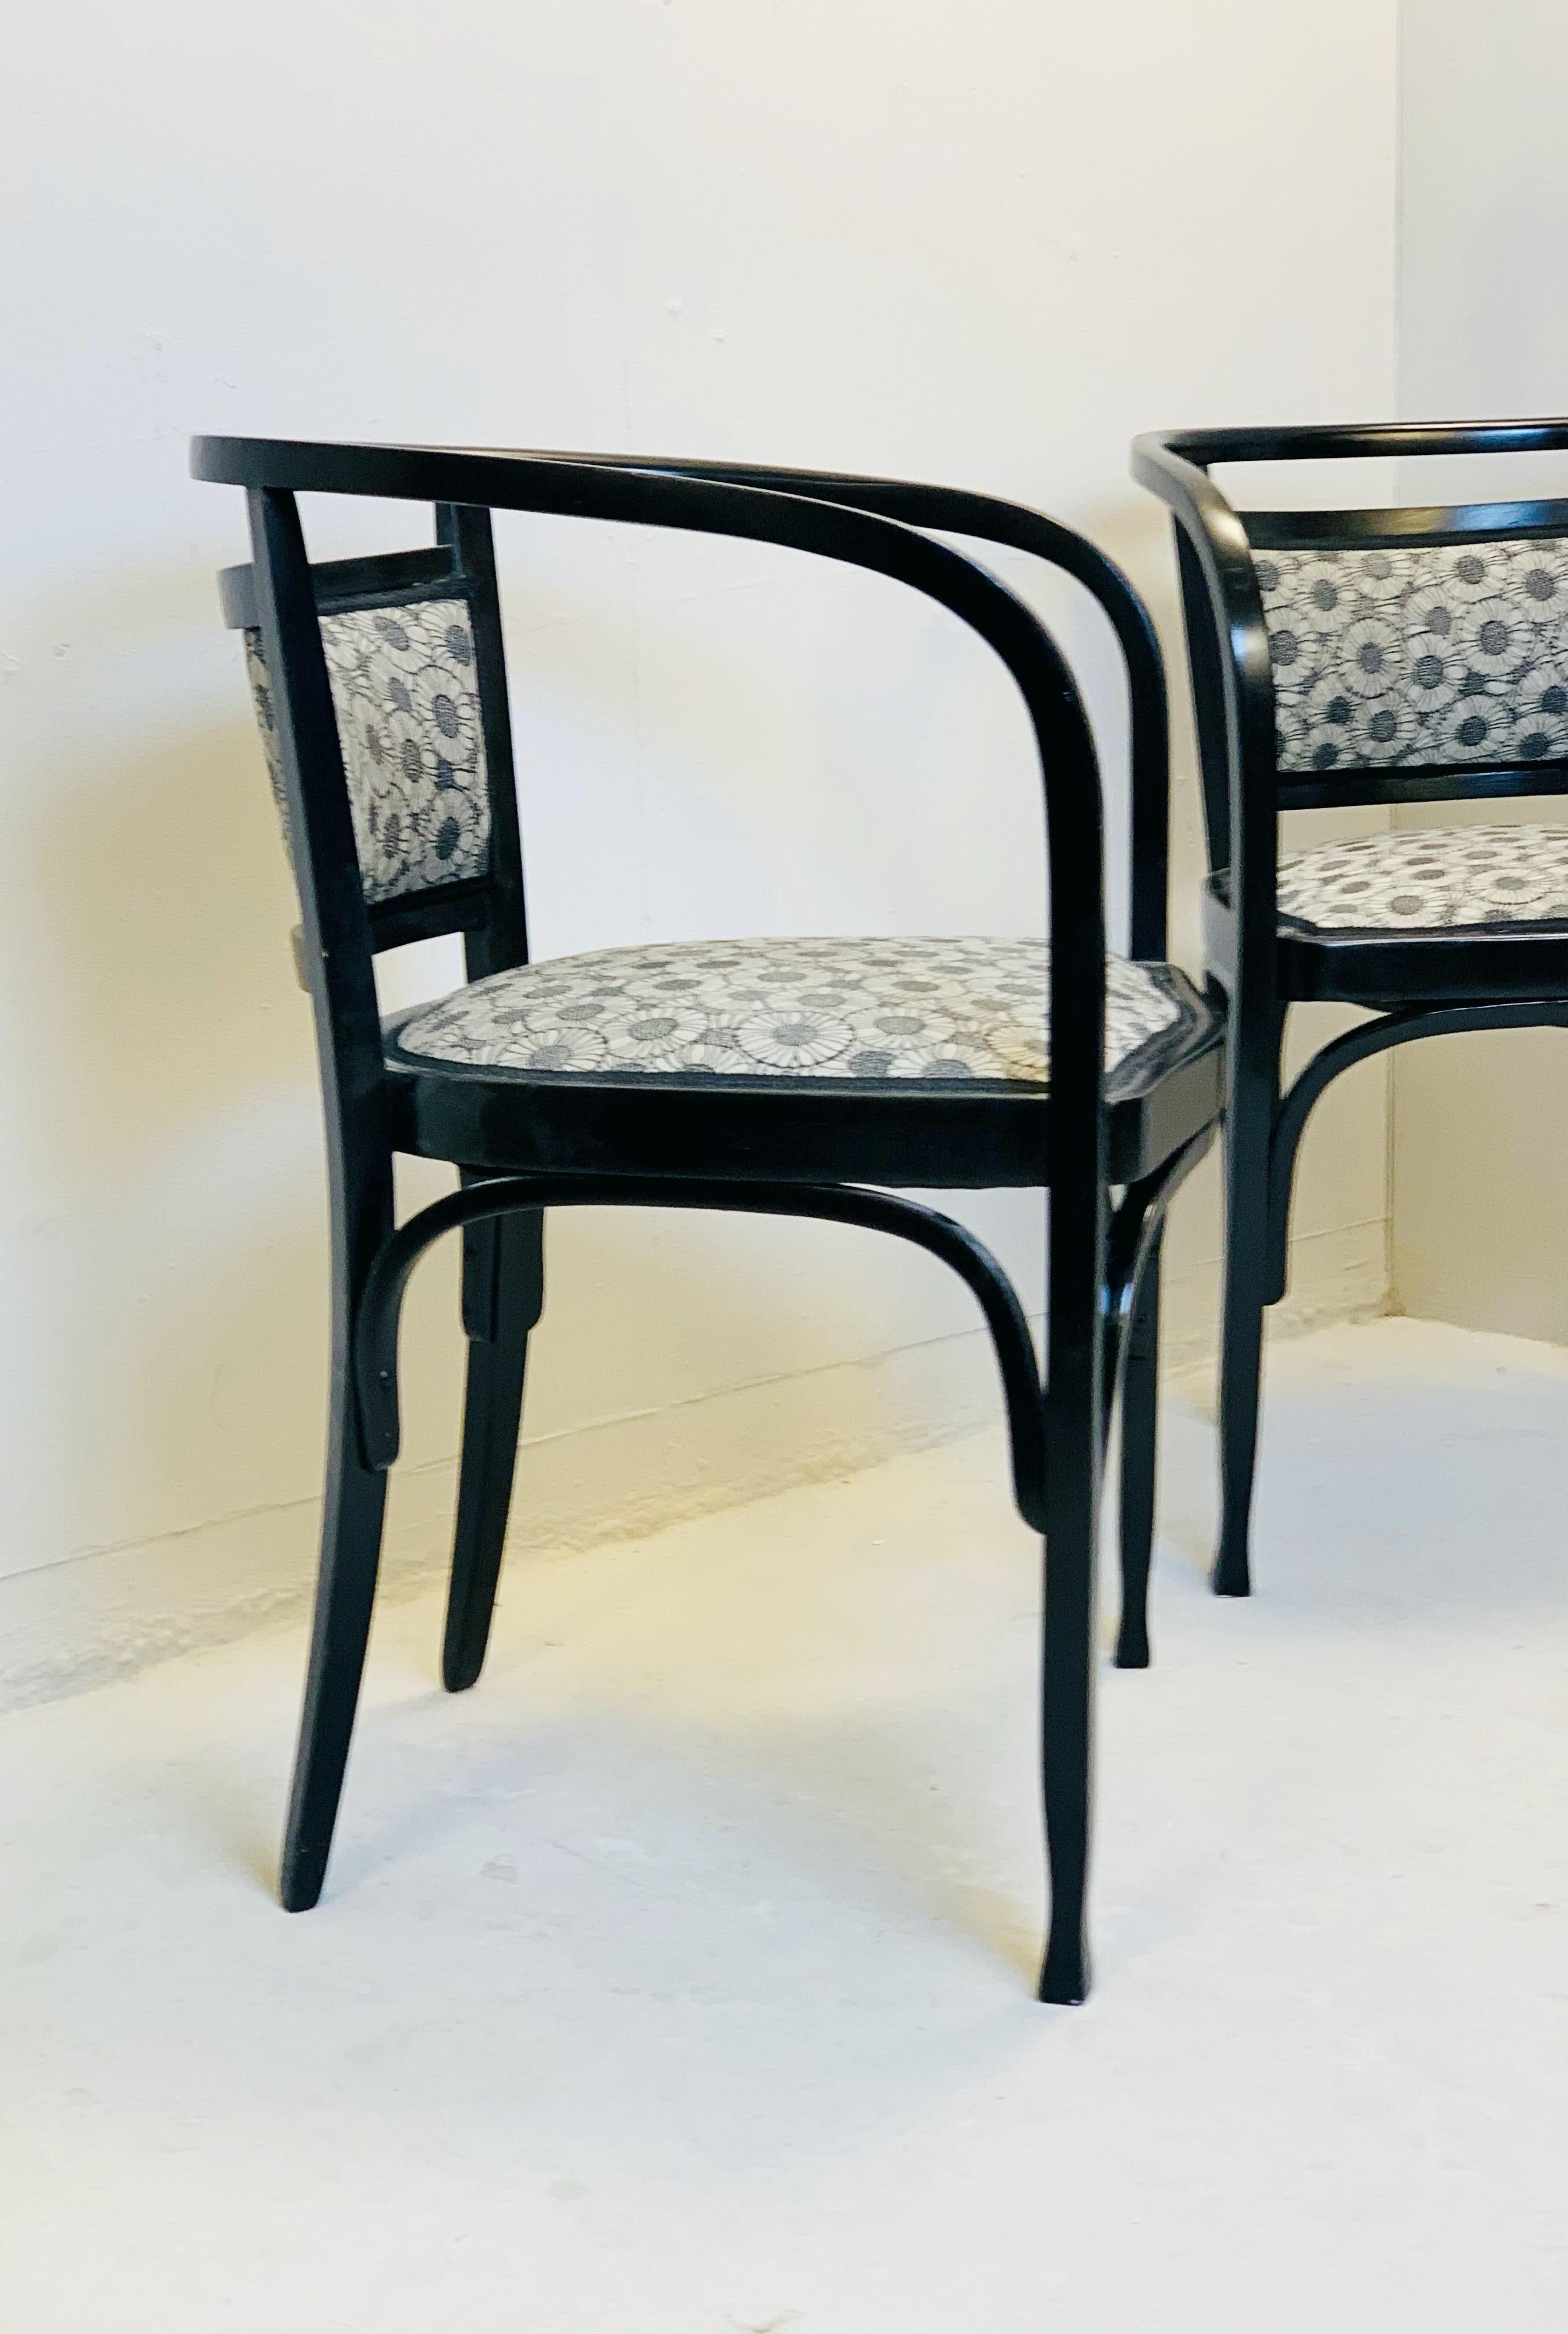 otto wagner furniture